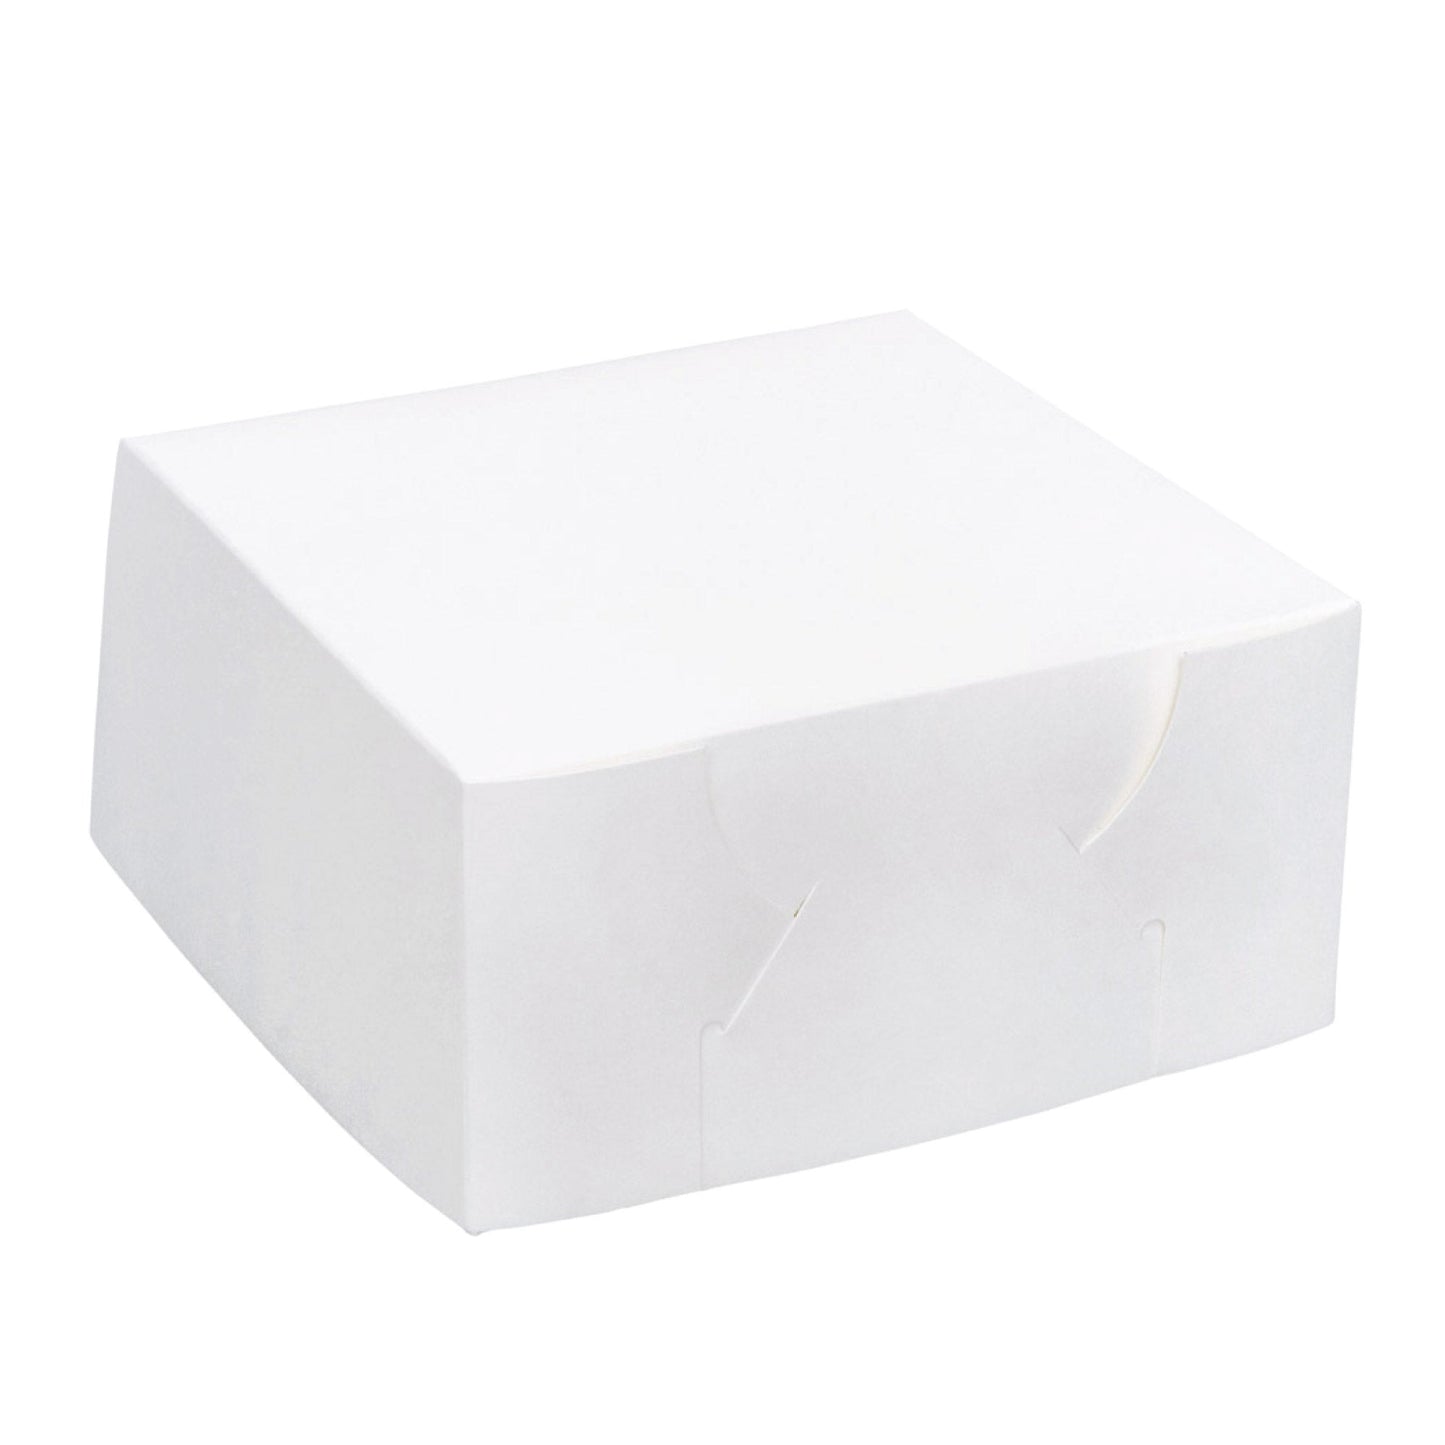 100x Takeaway Cake Box 6x6x3 Inches - Square Folding White Dessert Packaging